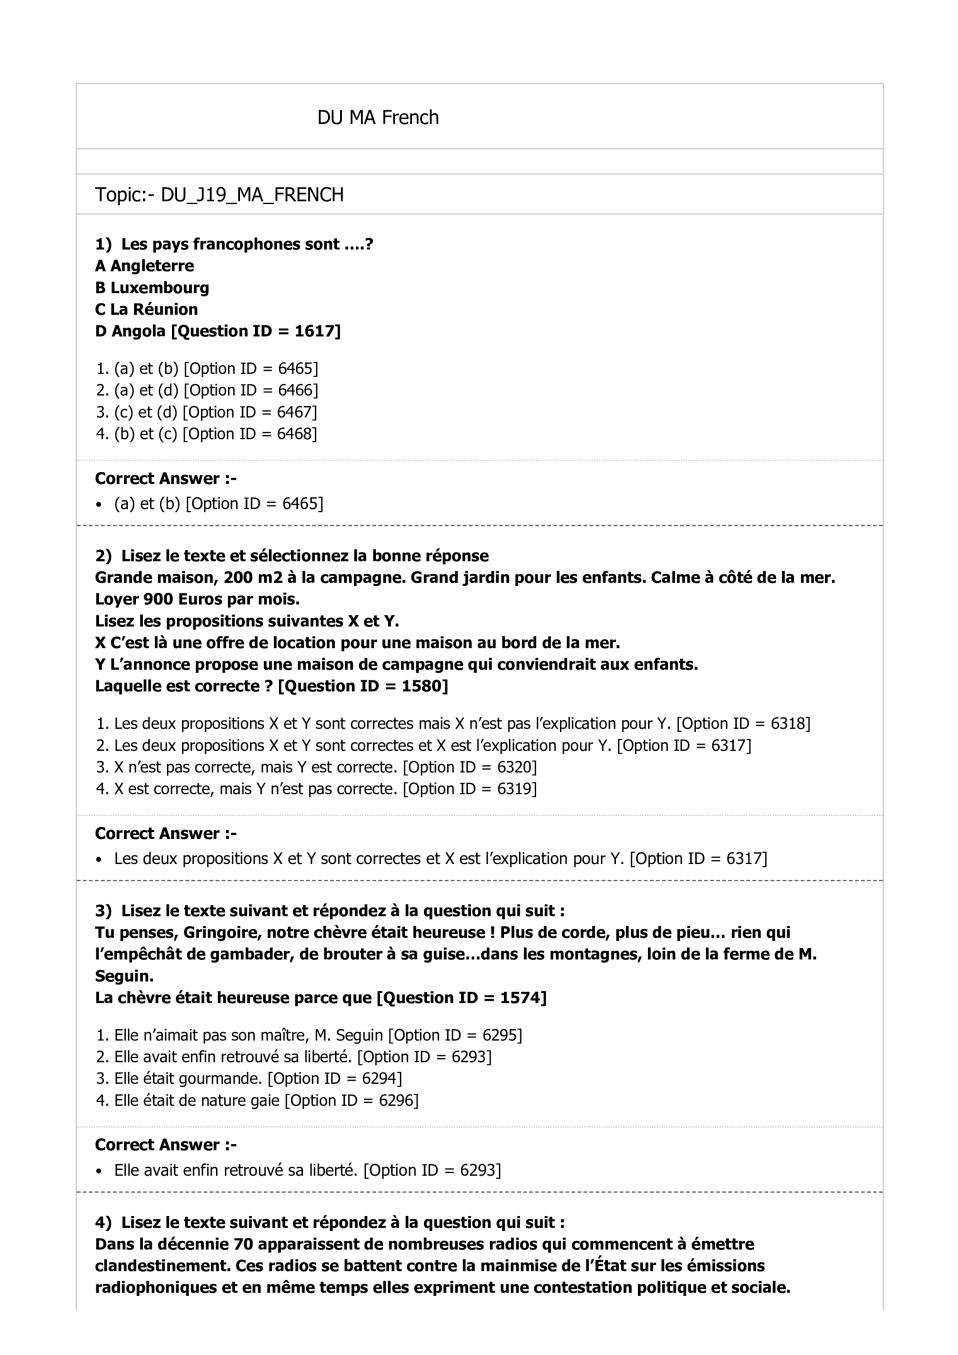 DUET Question Paper 2019 for MA French - Page 1